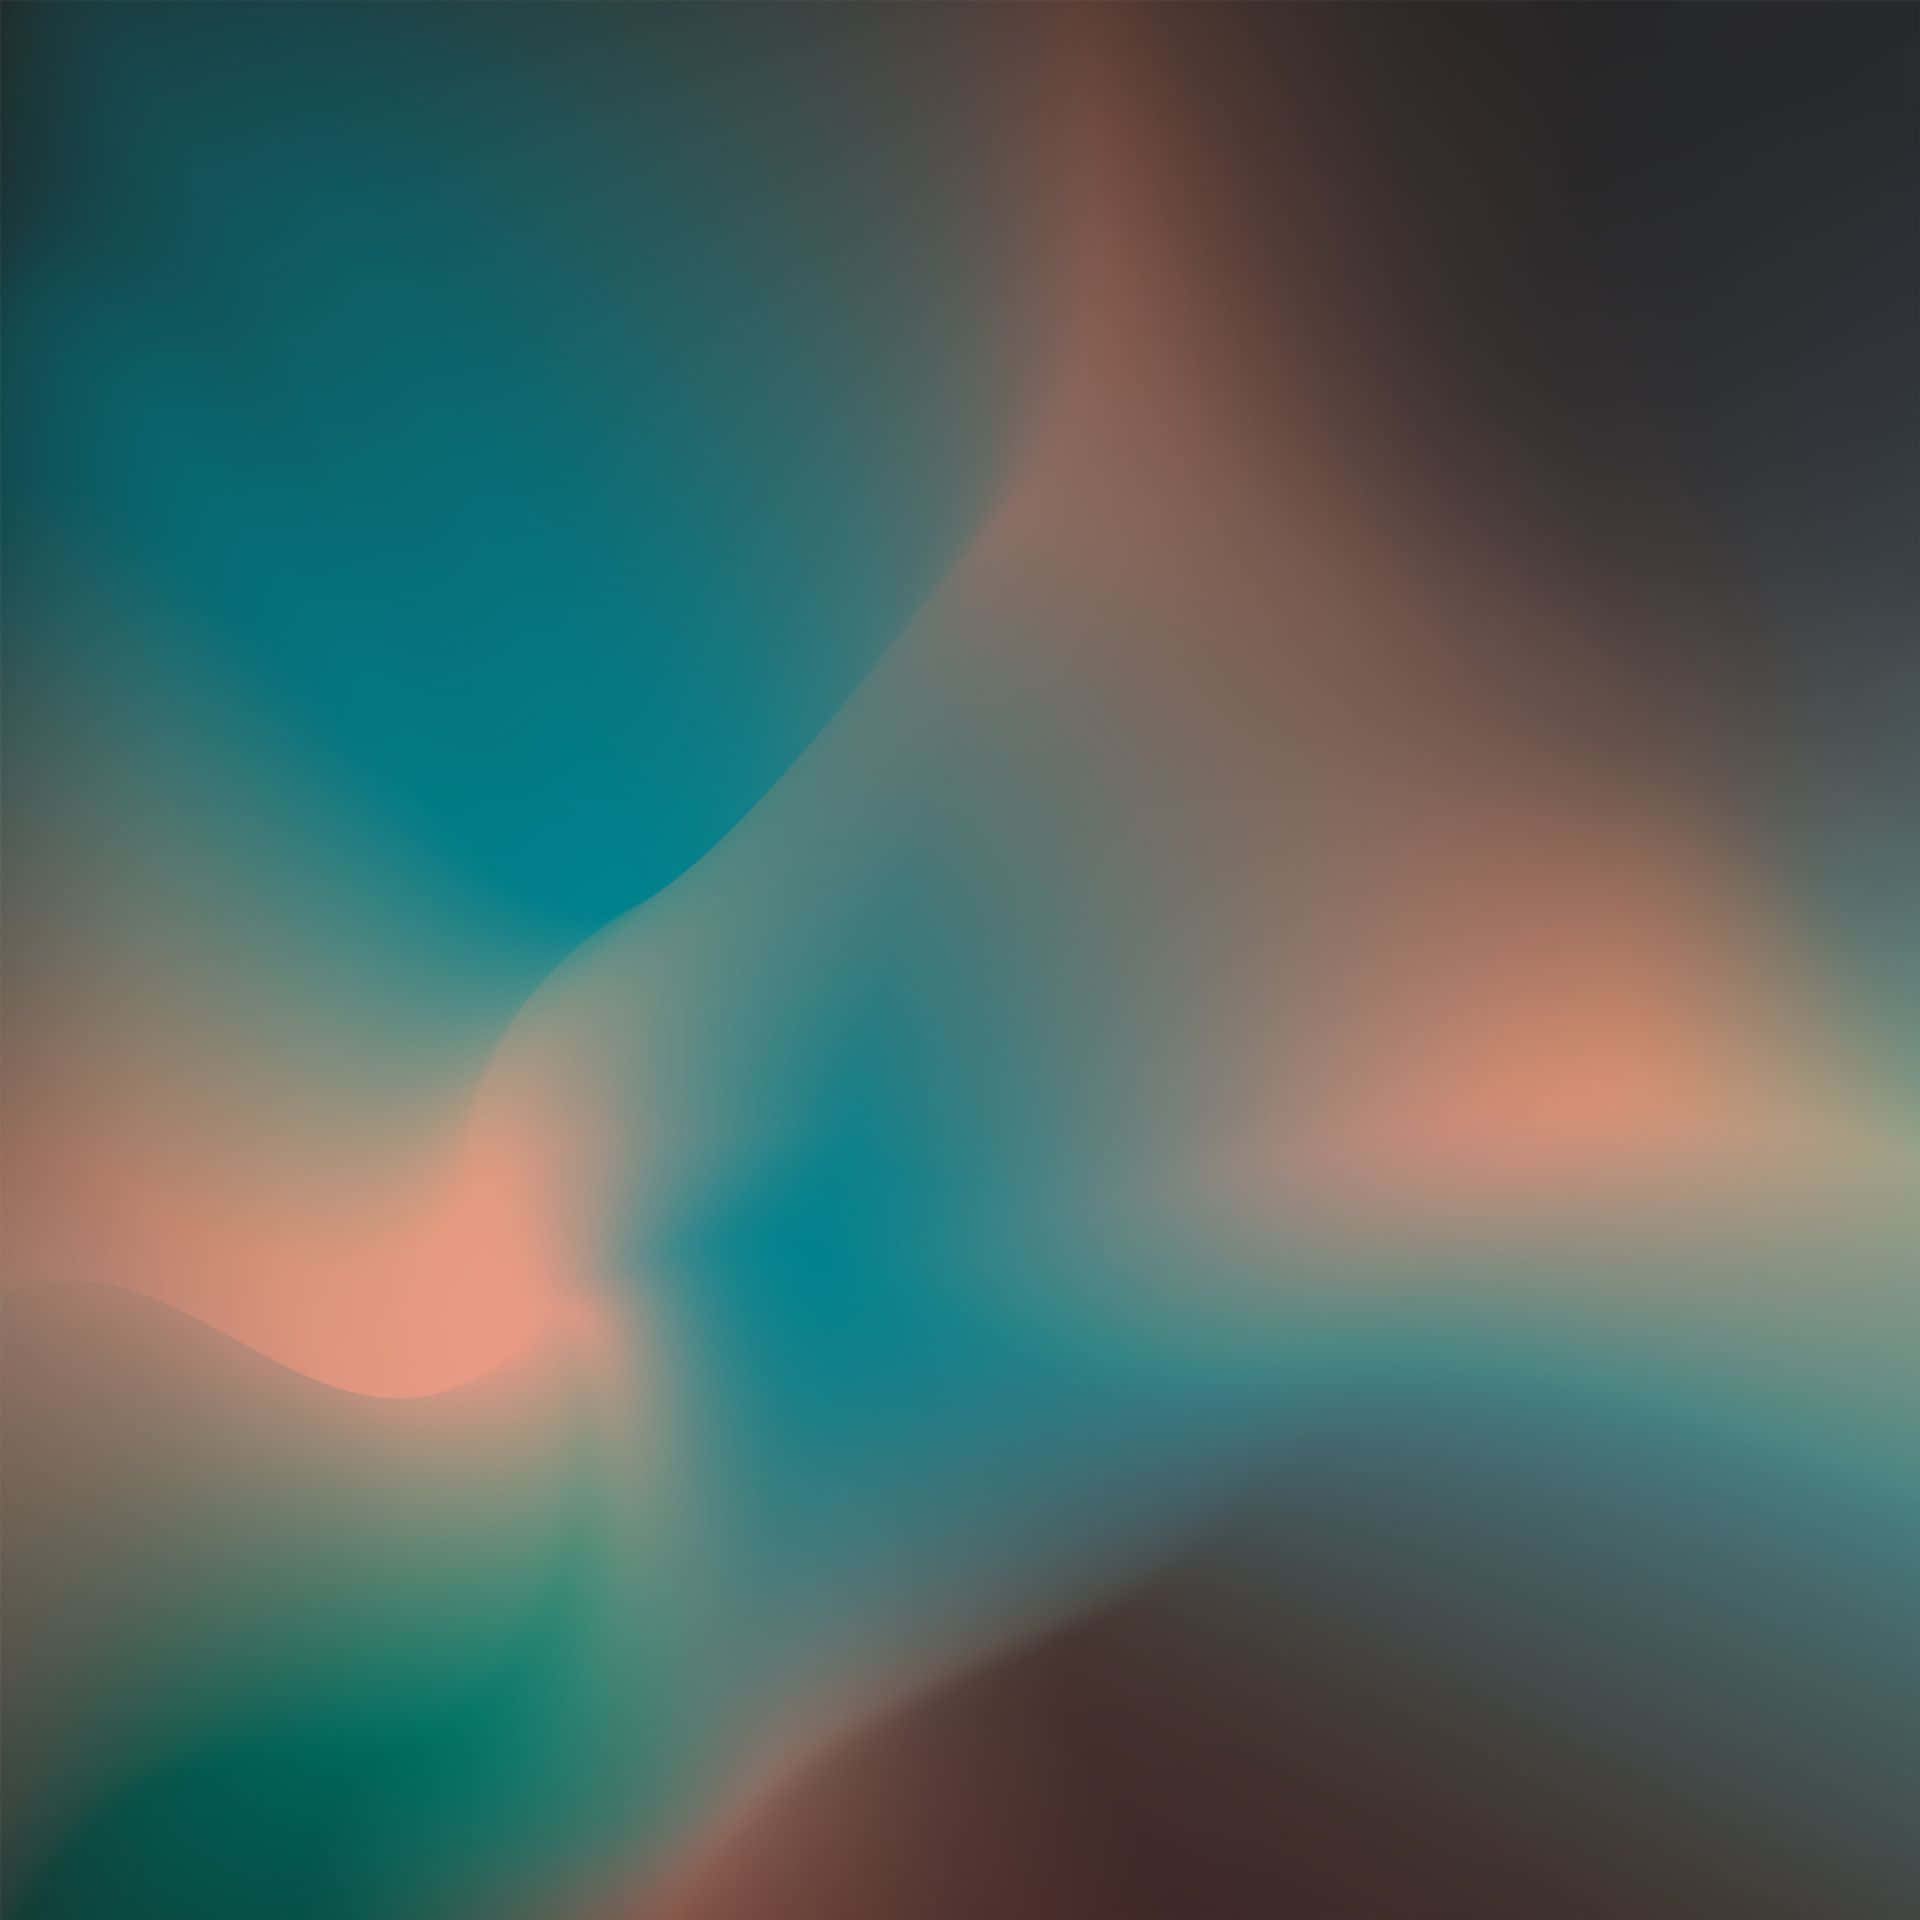 Image   Bright Colors of the Google Pixel 3 Wallpaper